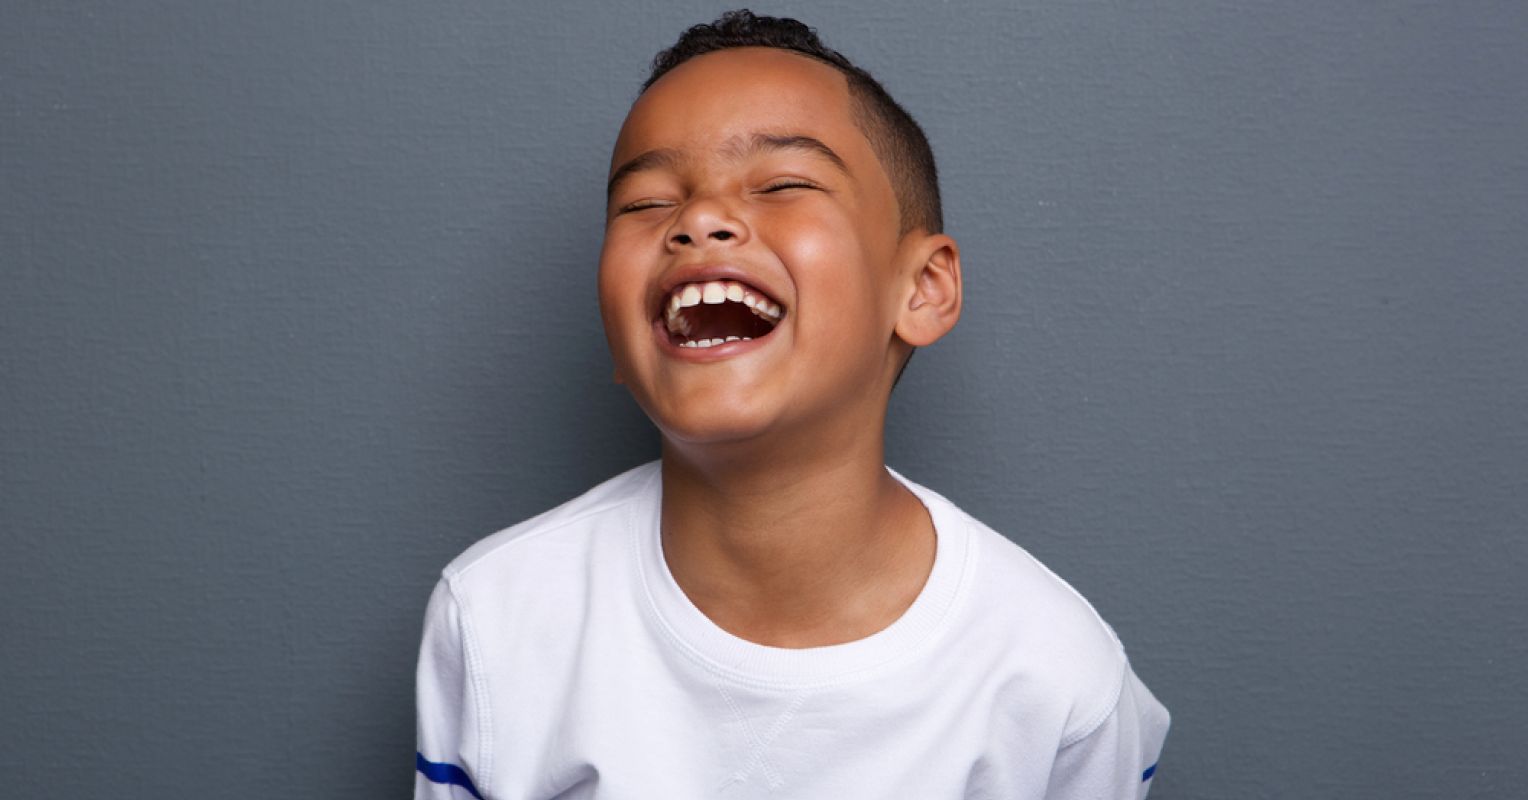 Laughter | Psychology Today